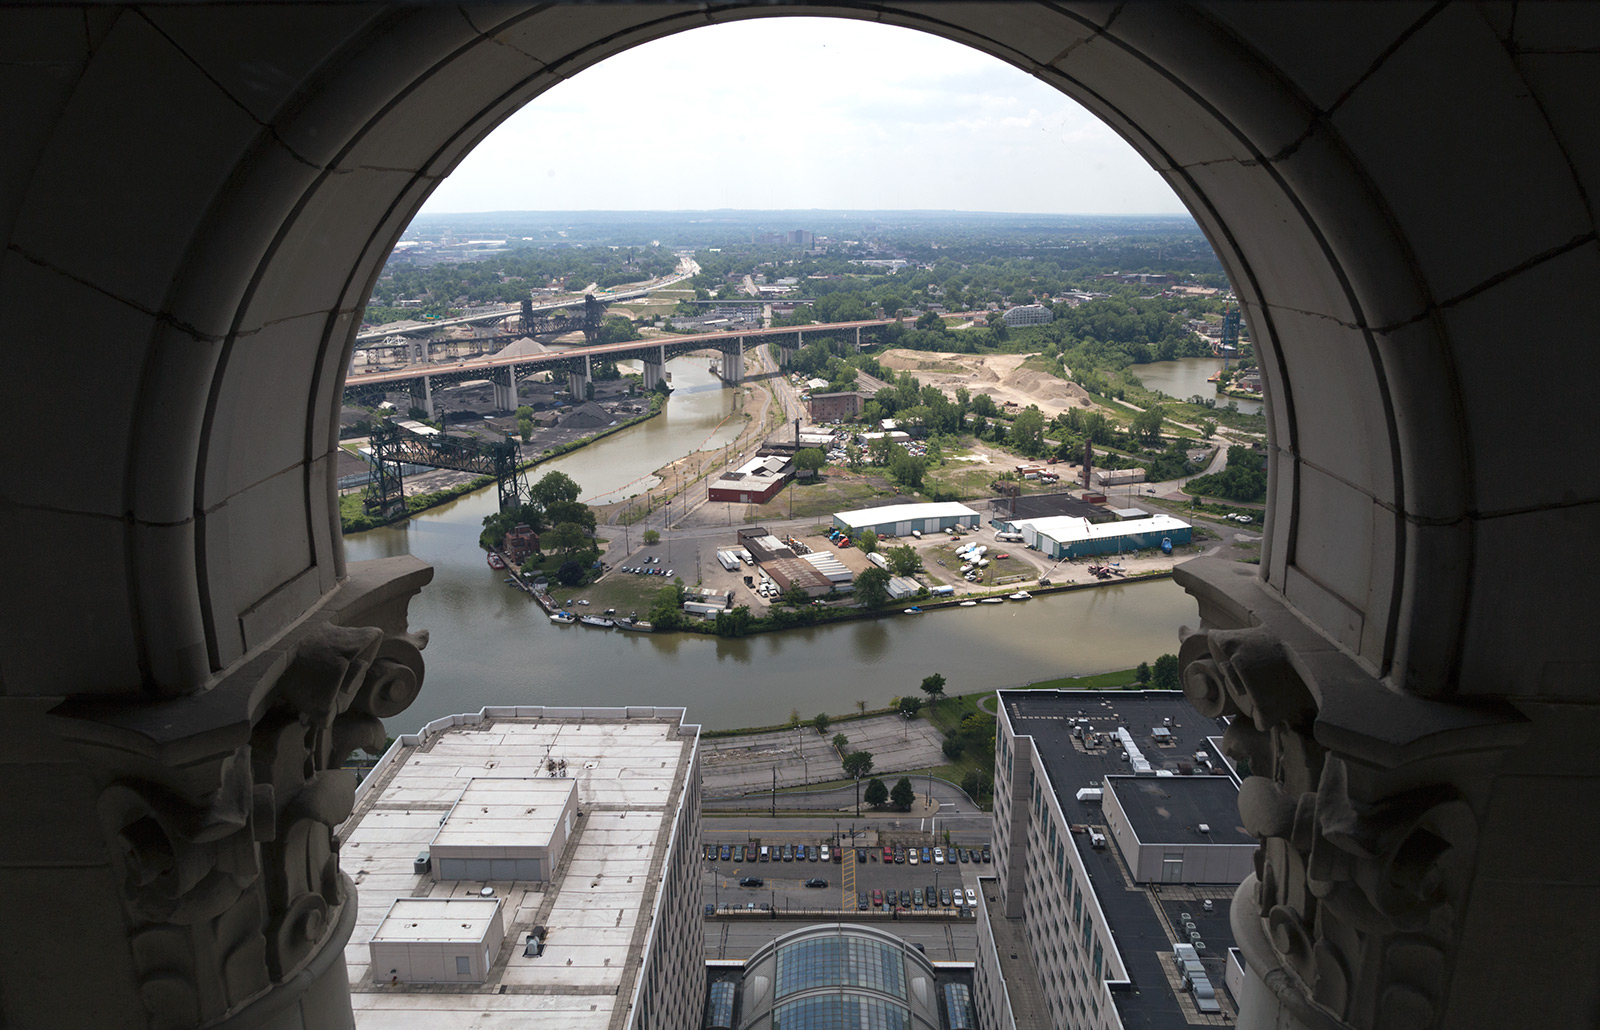 20140908. Looking south over the Cuyahoga River from below the a